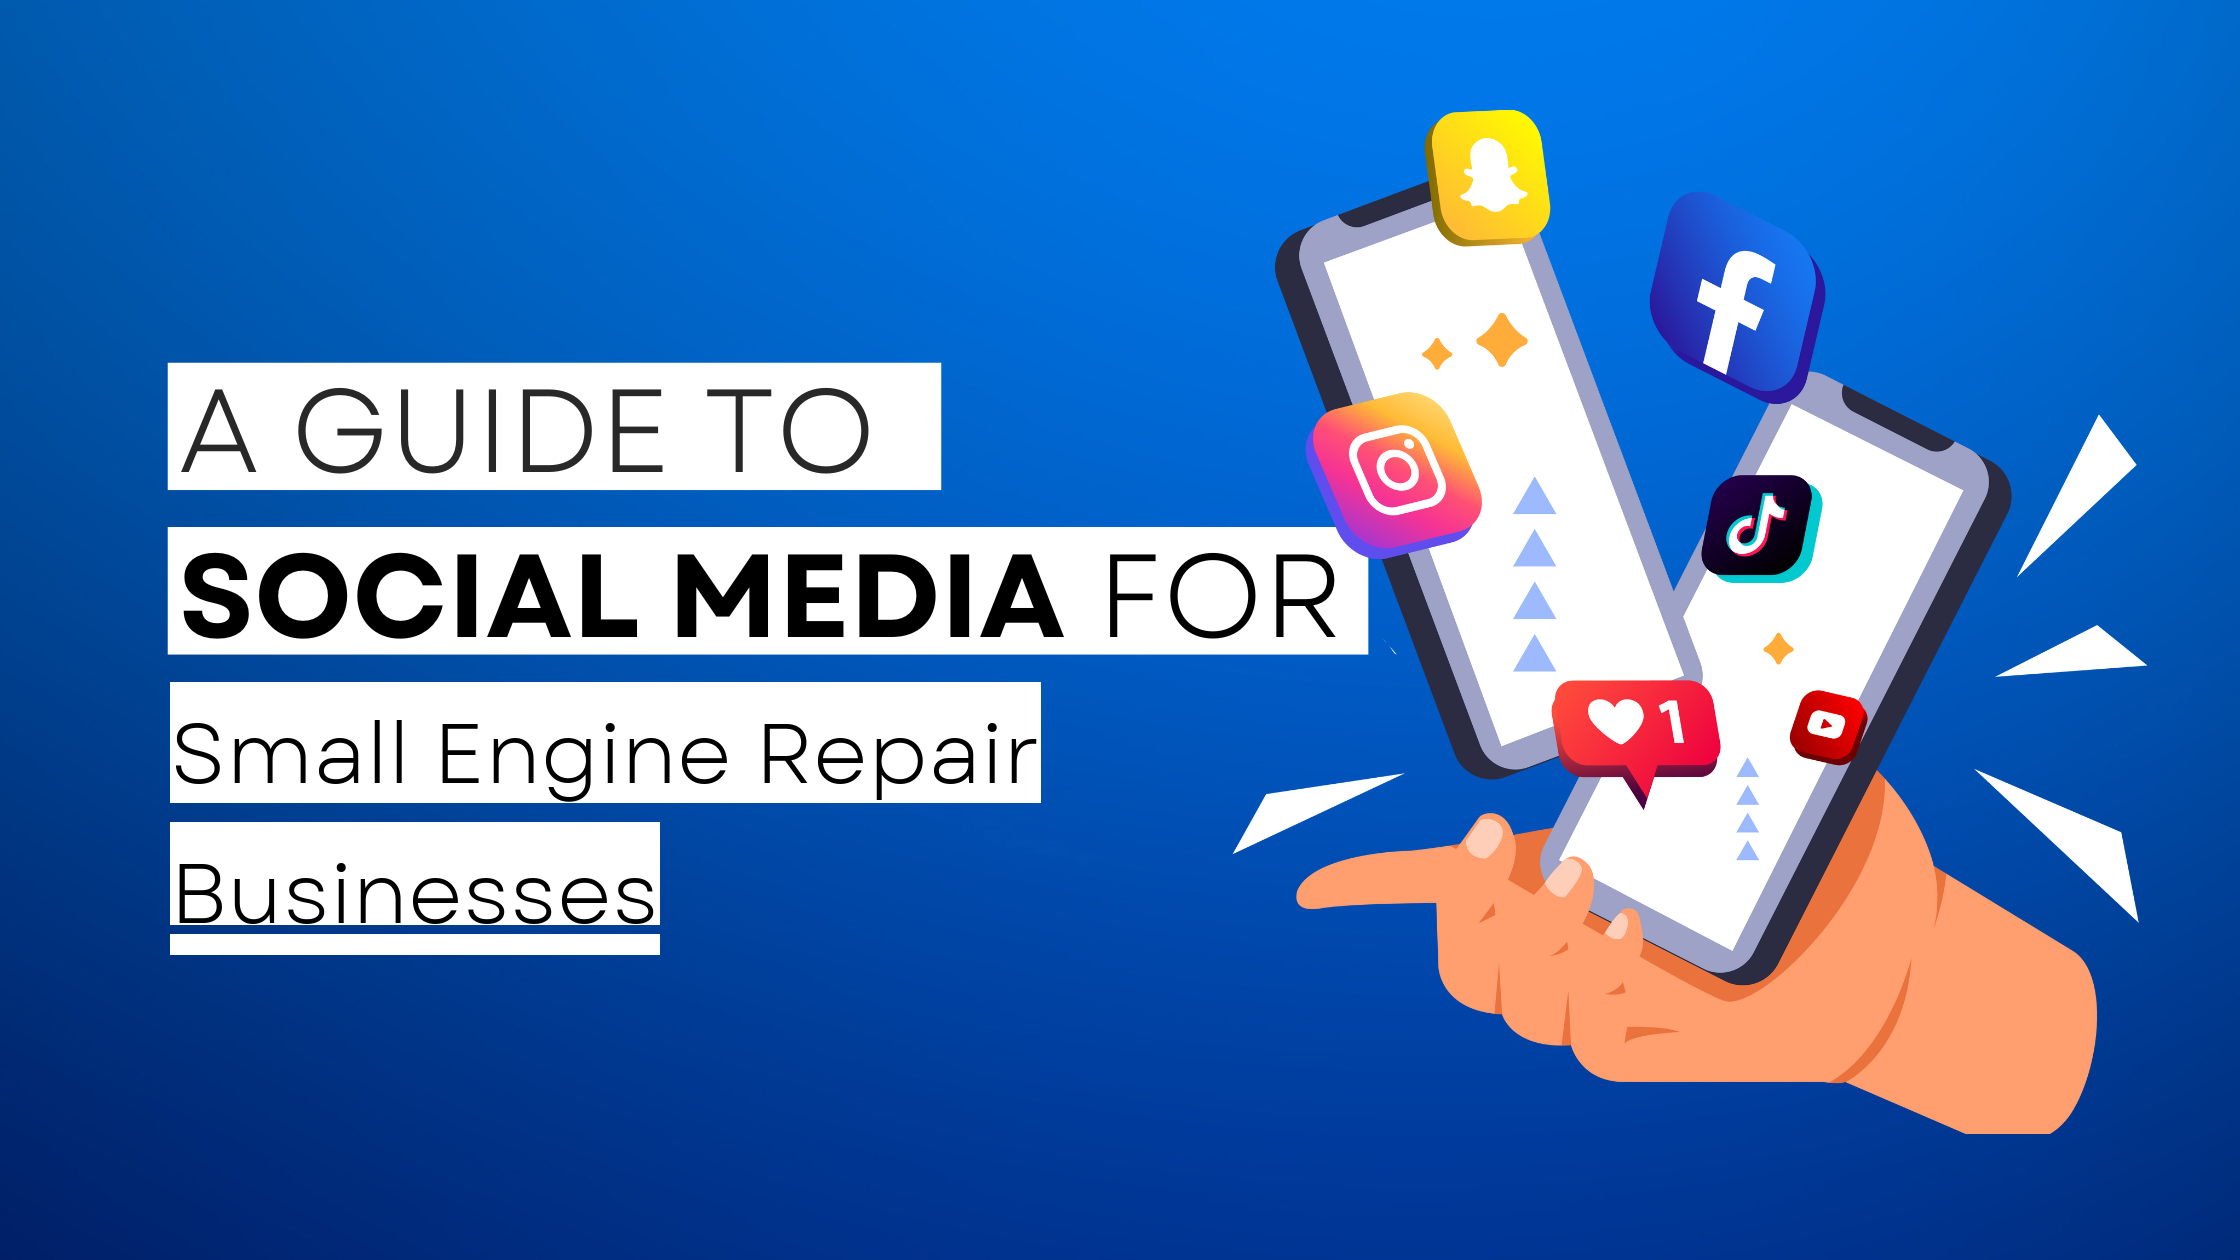 How to start Small Engine Repair  on social media